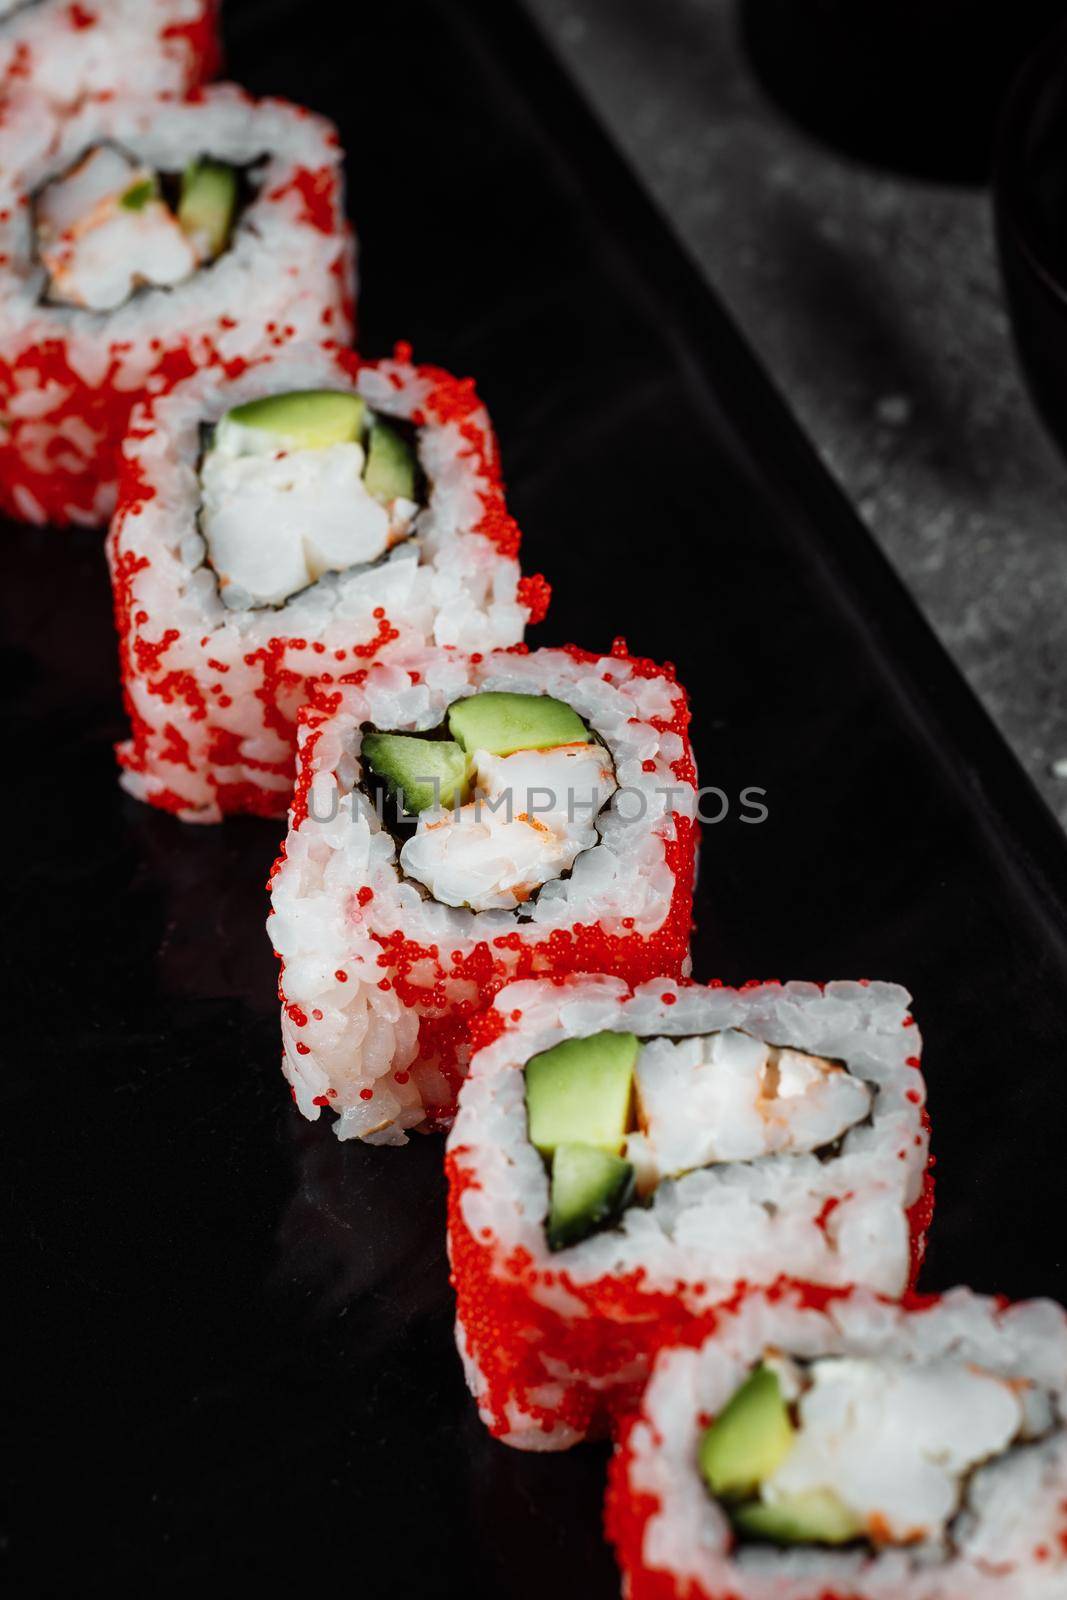 sushi roll california with shrimp, avocado and cheese. Traditional japanese sushi by UcheaD